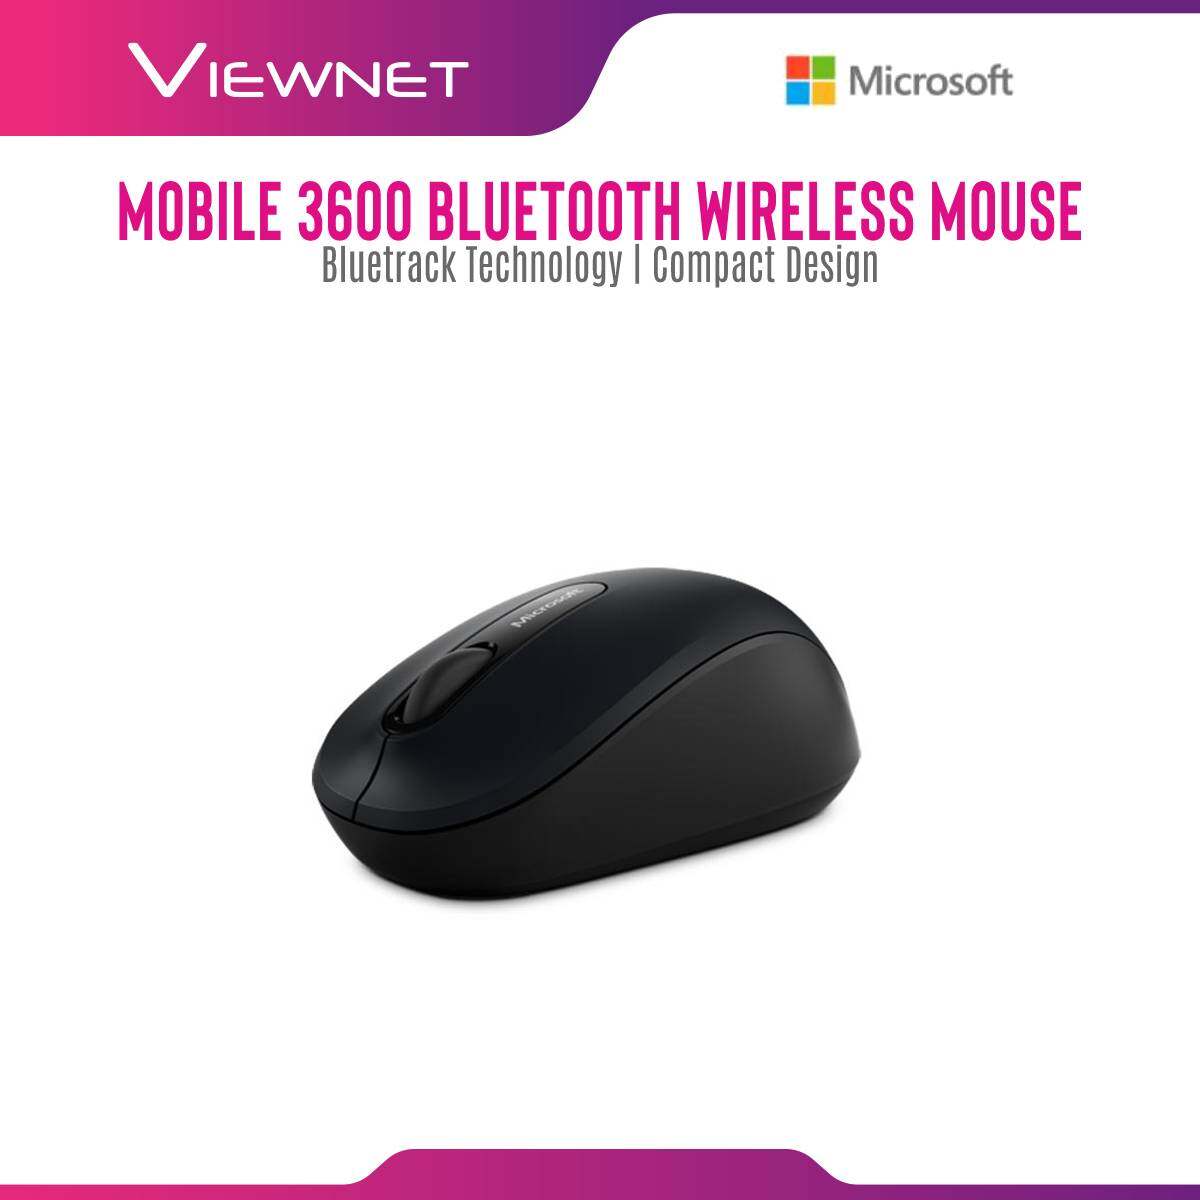 Microsoft Bluetooth Mobile Mouse 3600 with BlueTrack Technology, Bluetooth 4.0, Compact Design, 4-way Scroll Wheel, Up To 12 Month Battery Life, Plug and Play